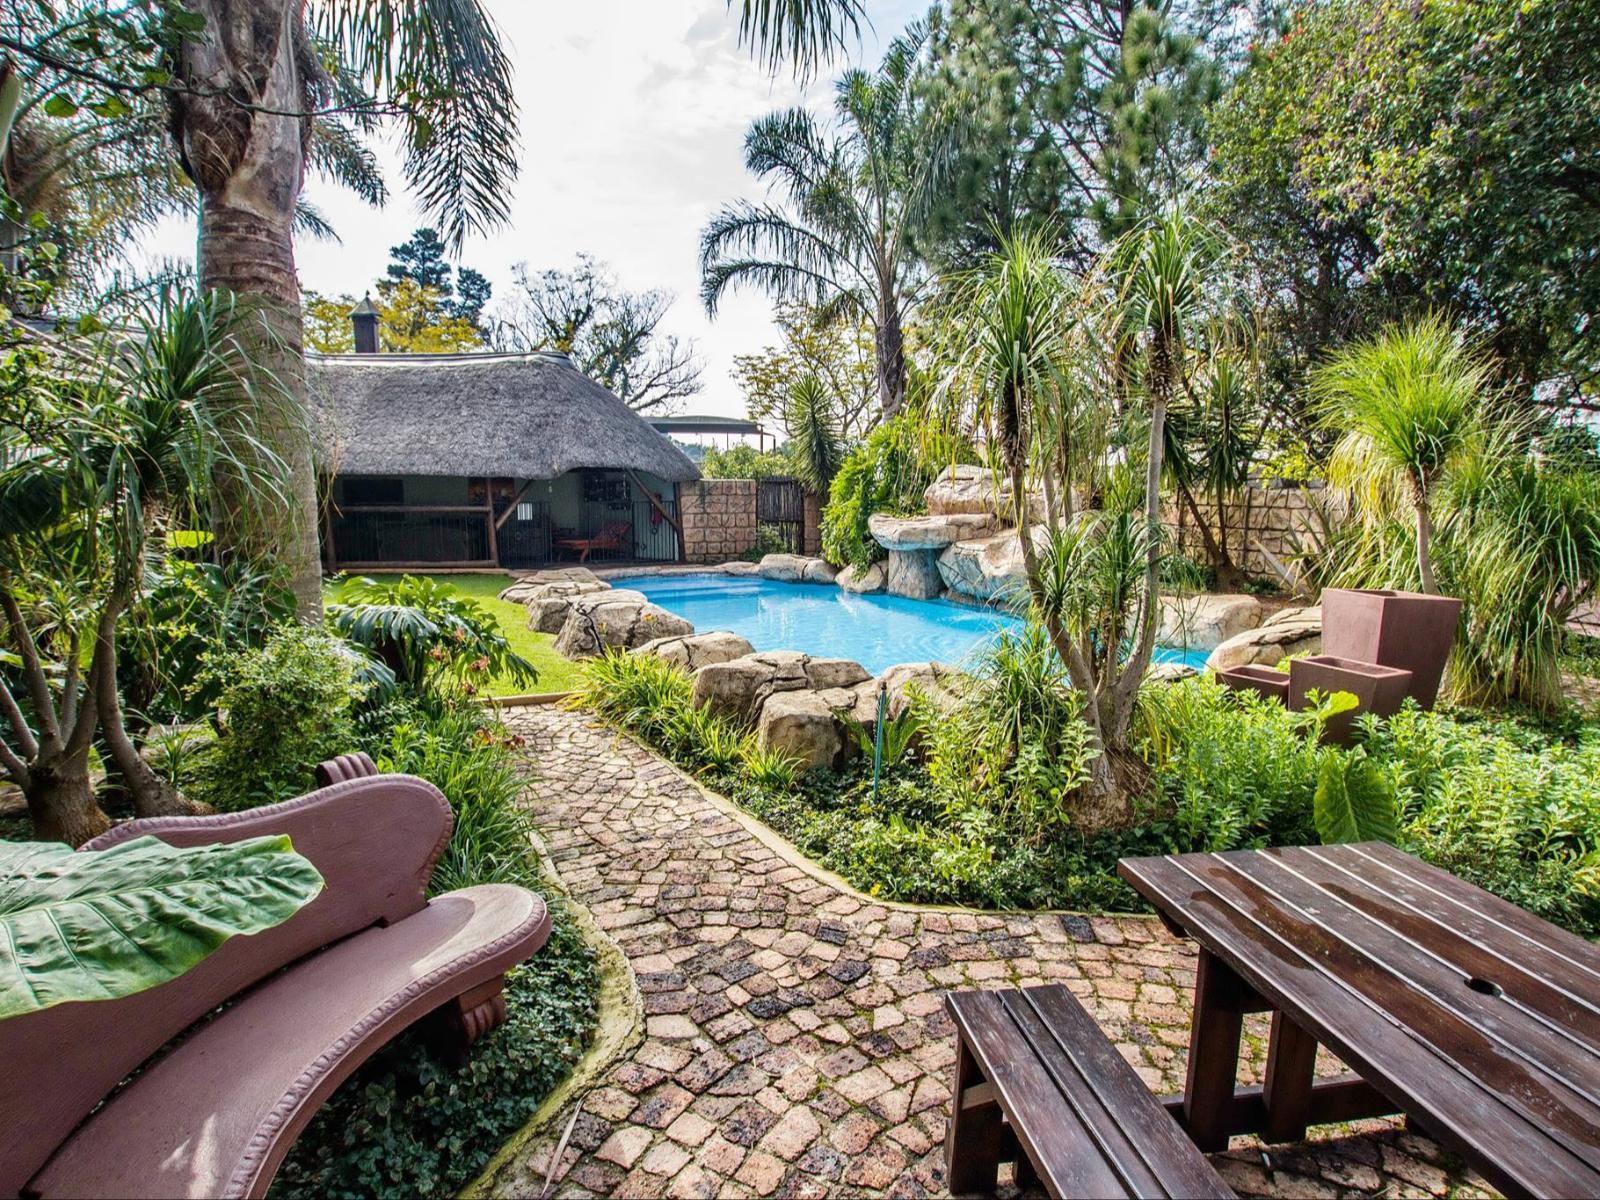 Summer Garden Guest House The Palms Farrarmere Johannesburg Gauteng South Africa House, Building, Architecture, Palm Tree, Plant, Nature, Wood, Garden, Swimming Pool